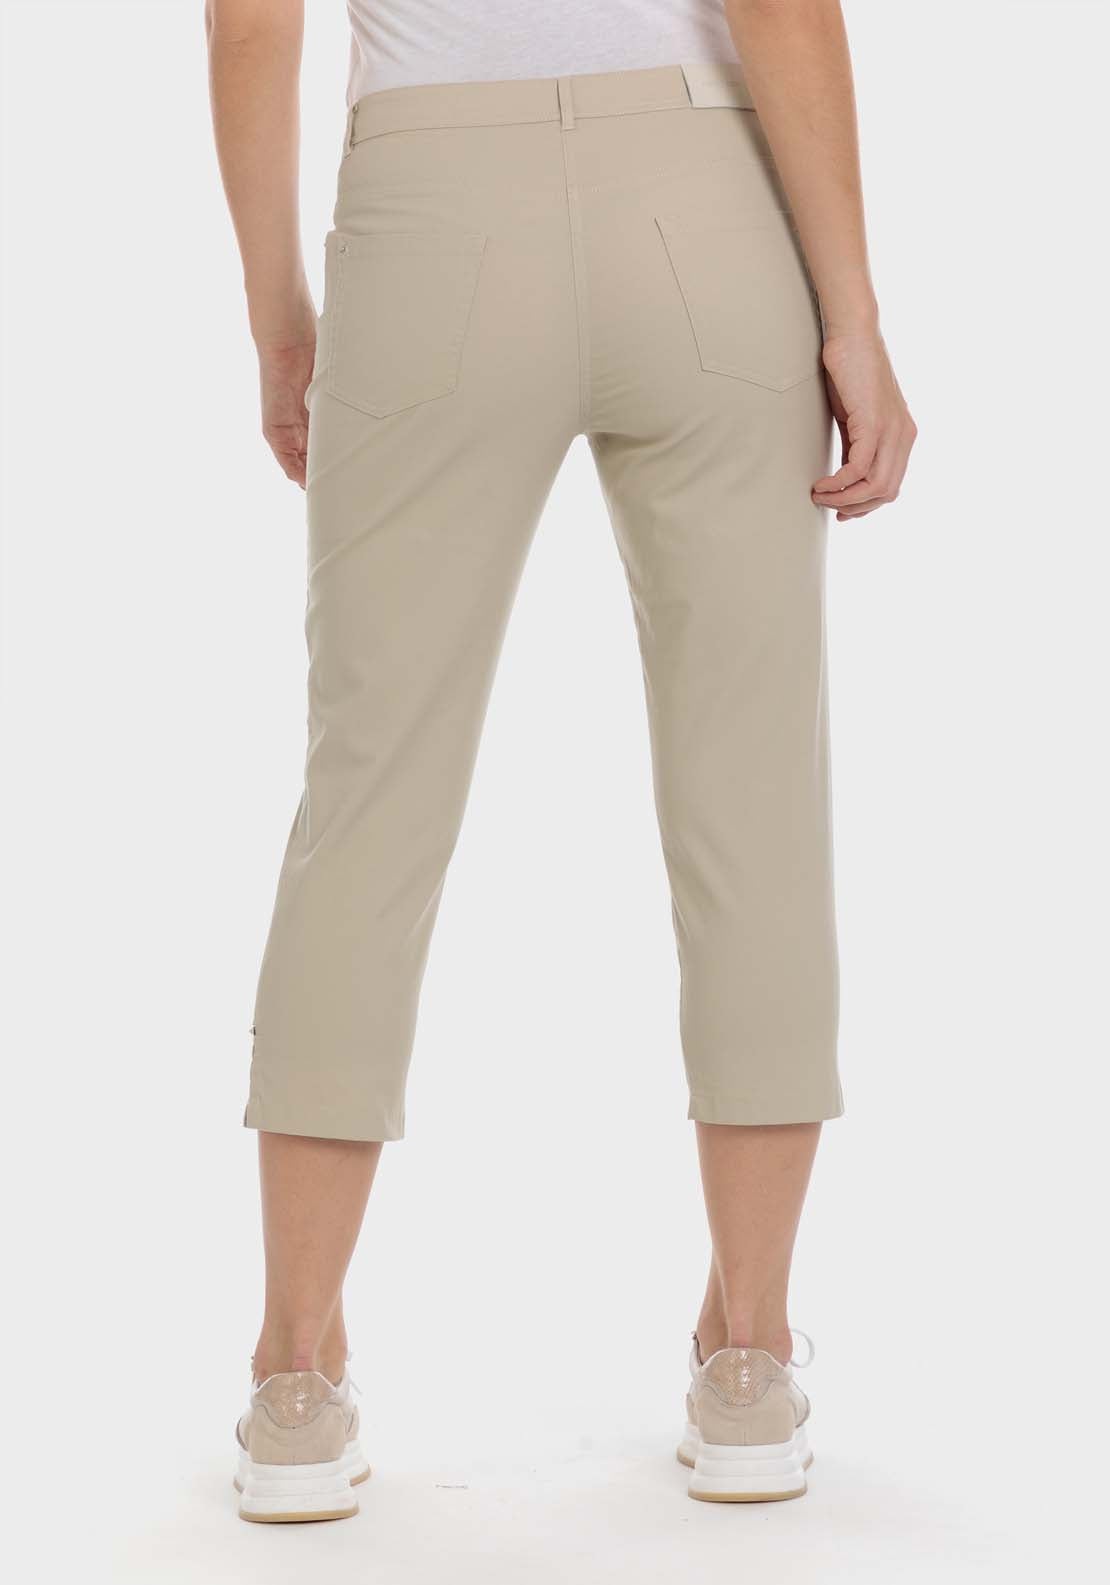 Punt Roma Cotton Crop Trousers - Beige 2 Shaws Department Stores